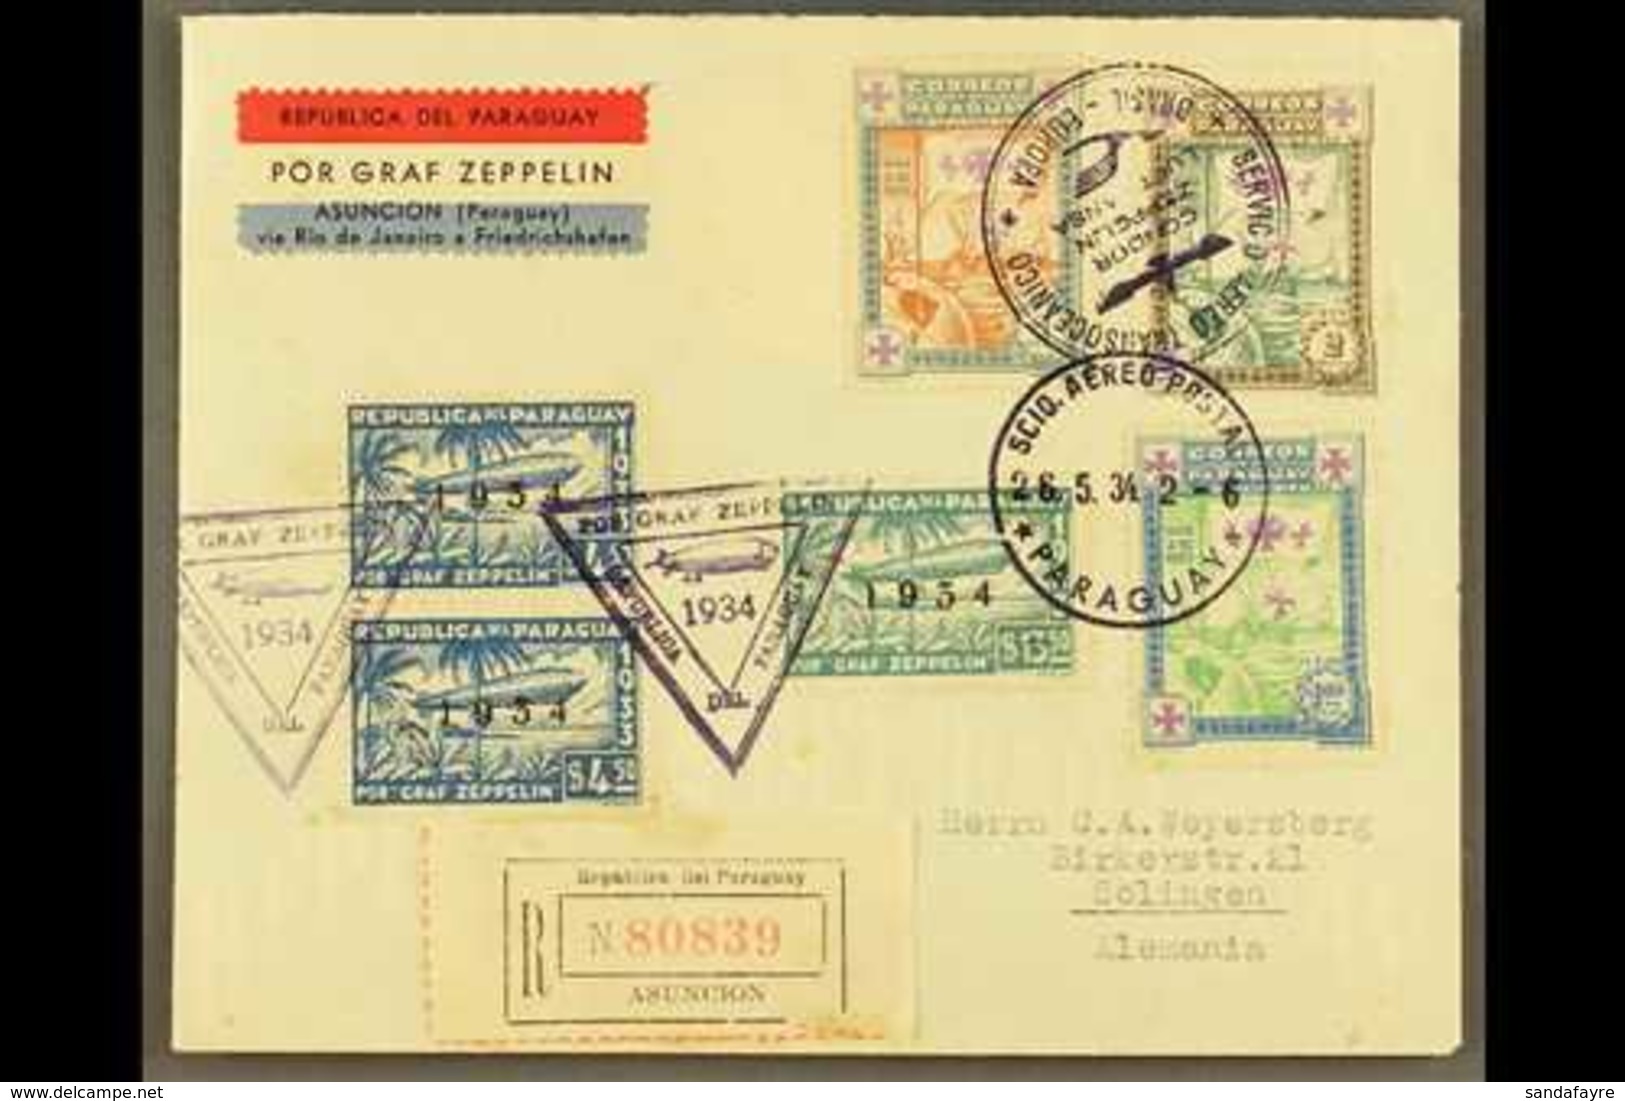 1934 Registerd Air Letter To Germany Franked 1p, 1p50 And 2p "Flag" Stamps Tied Various Cds Cancels Incl Condor, Lufthan - Paraguay